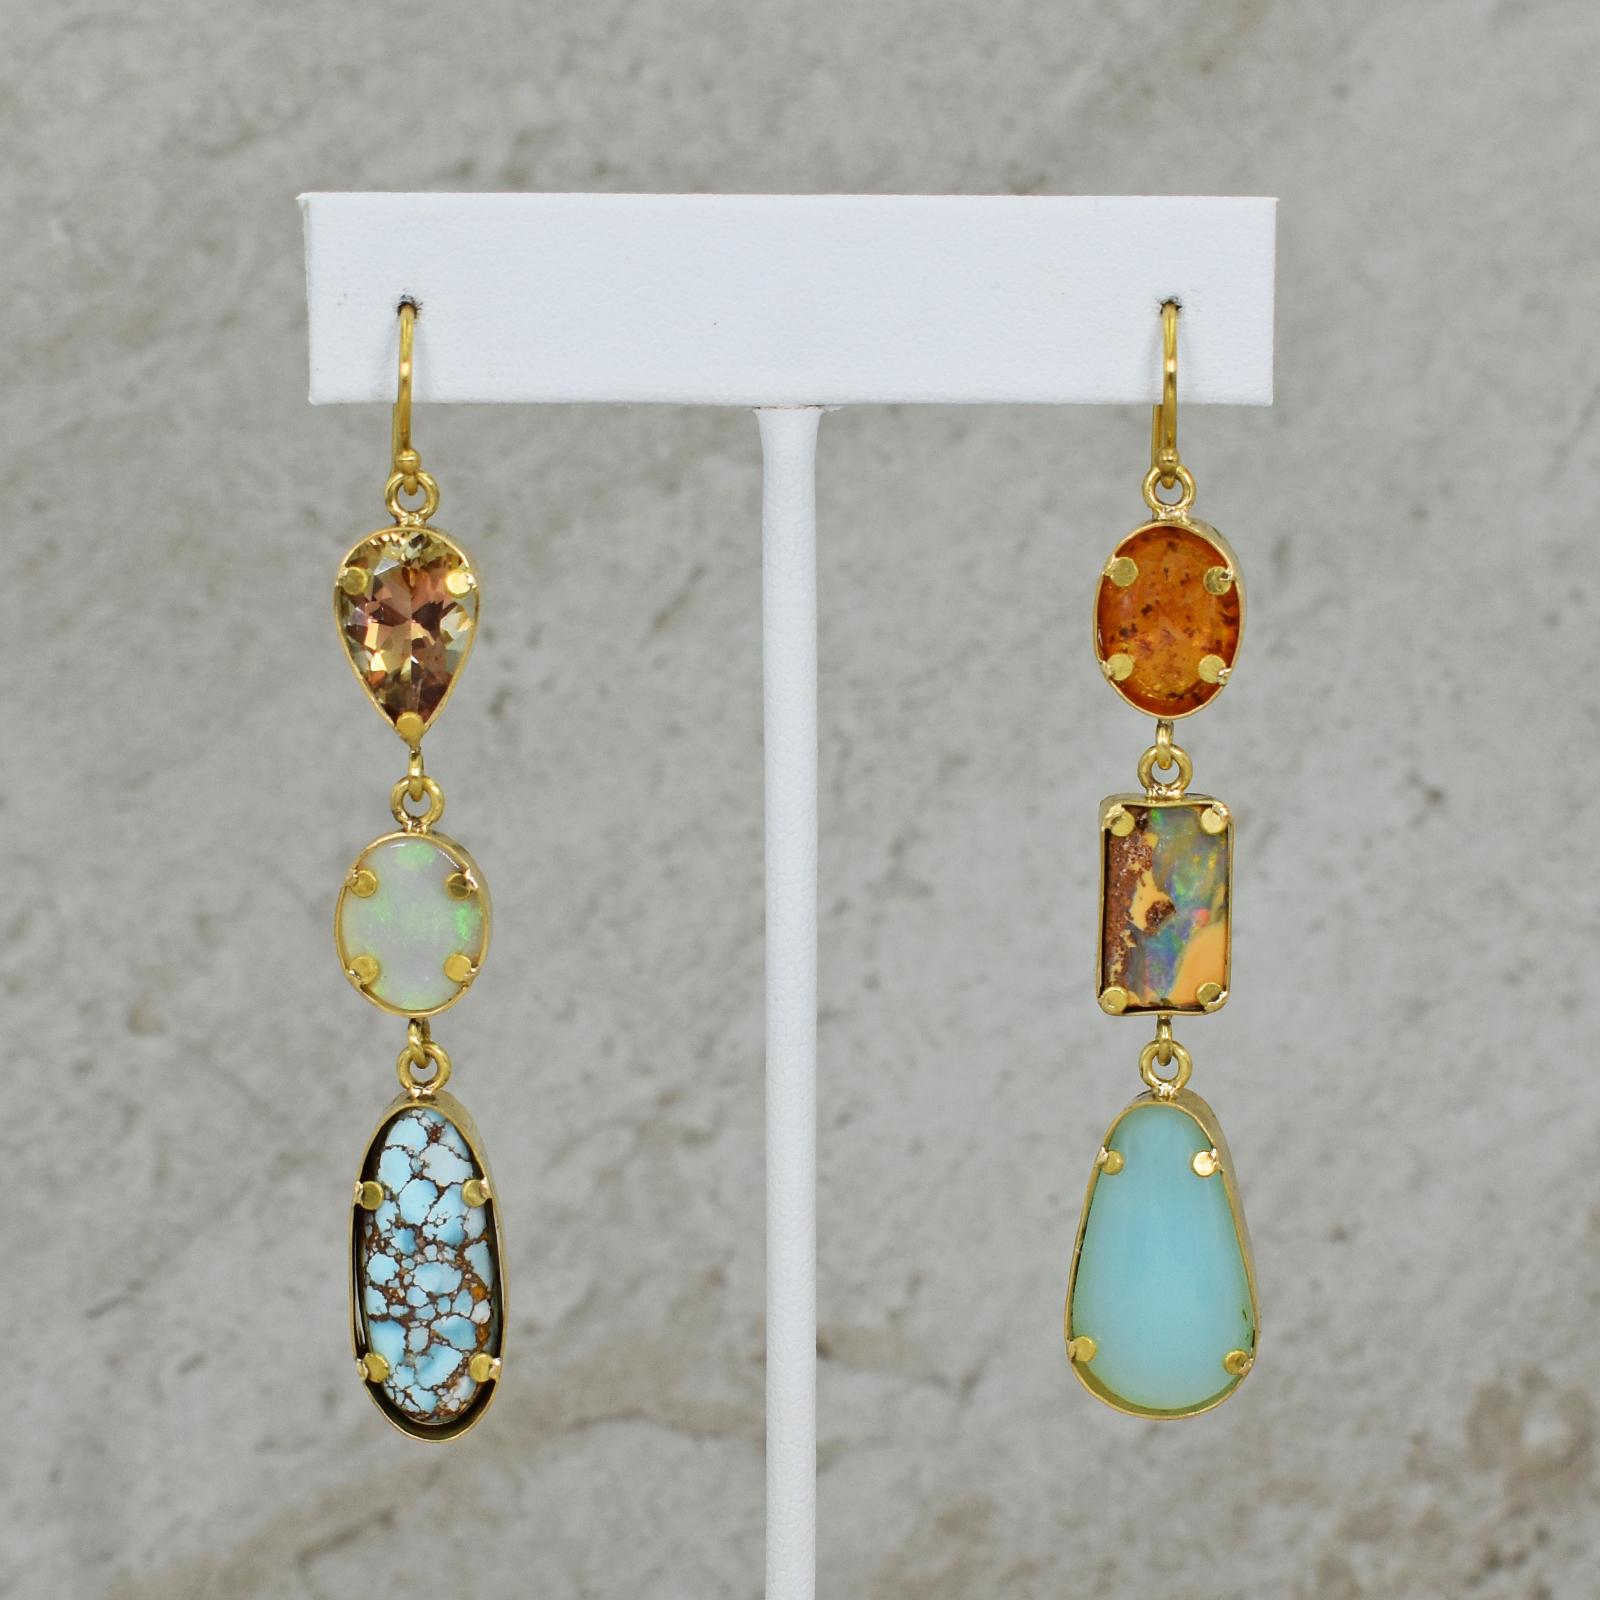 Three tier, hand forged 22k yellow gold dangle earrings featuring Andalusite (3.7 ct), Opal (1.5 ct), Golden Hills Kazakhstan Turquoise (10.2 ct), Amber (7.0 ct), Australian Boulder Opal (5.1 ct), and Peruvian Blue Opal (8.0 ct) gemstones. Dangle